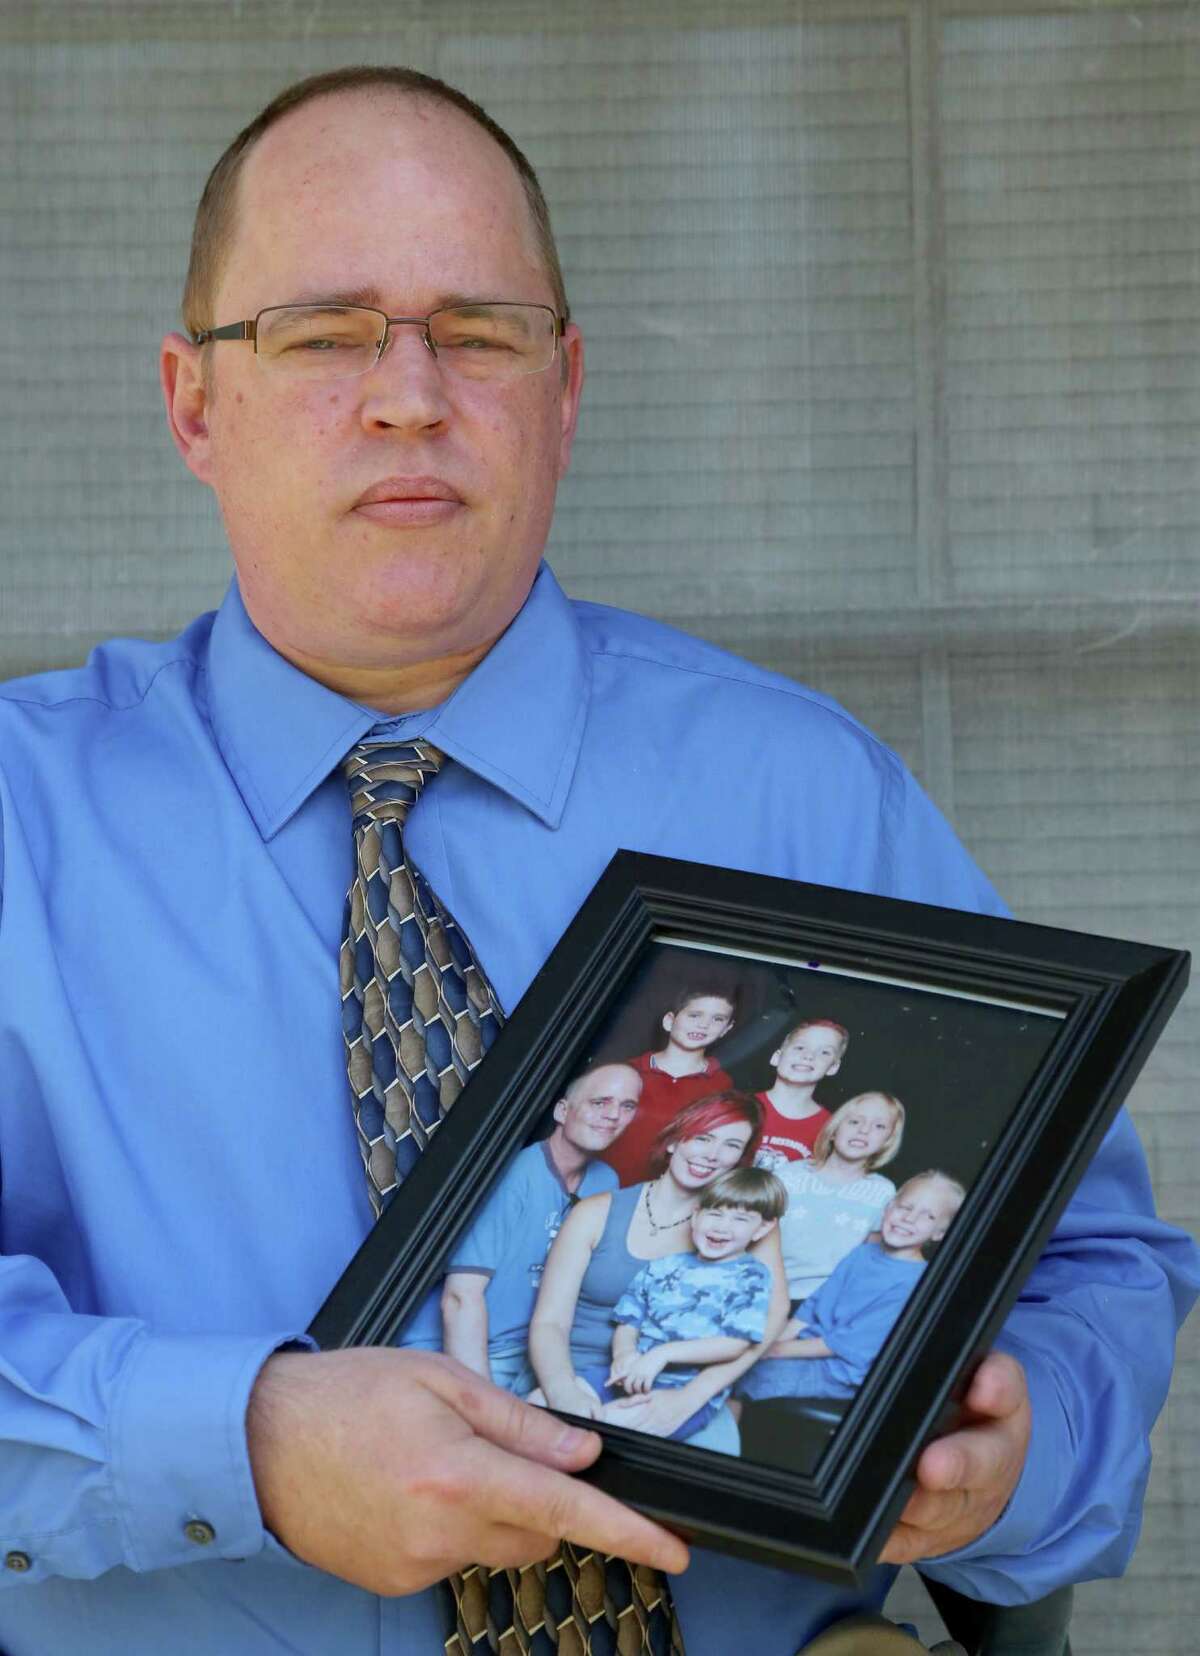 David Brasse holds a family portrait on his porch of his home in Alvin. He and then-fiancee Samantha Britain had been investigated by CPS for two years before Sarah died in 2009.